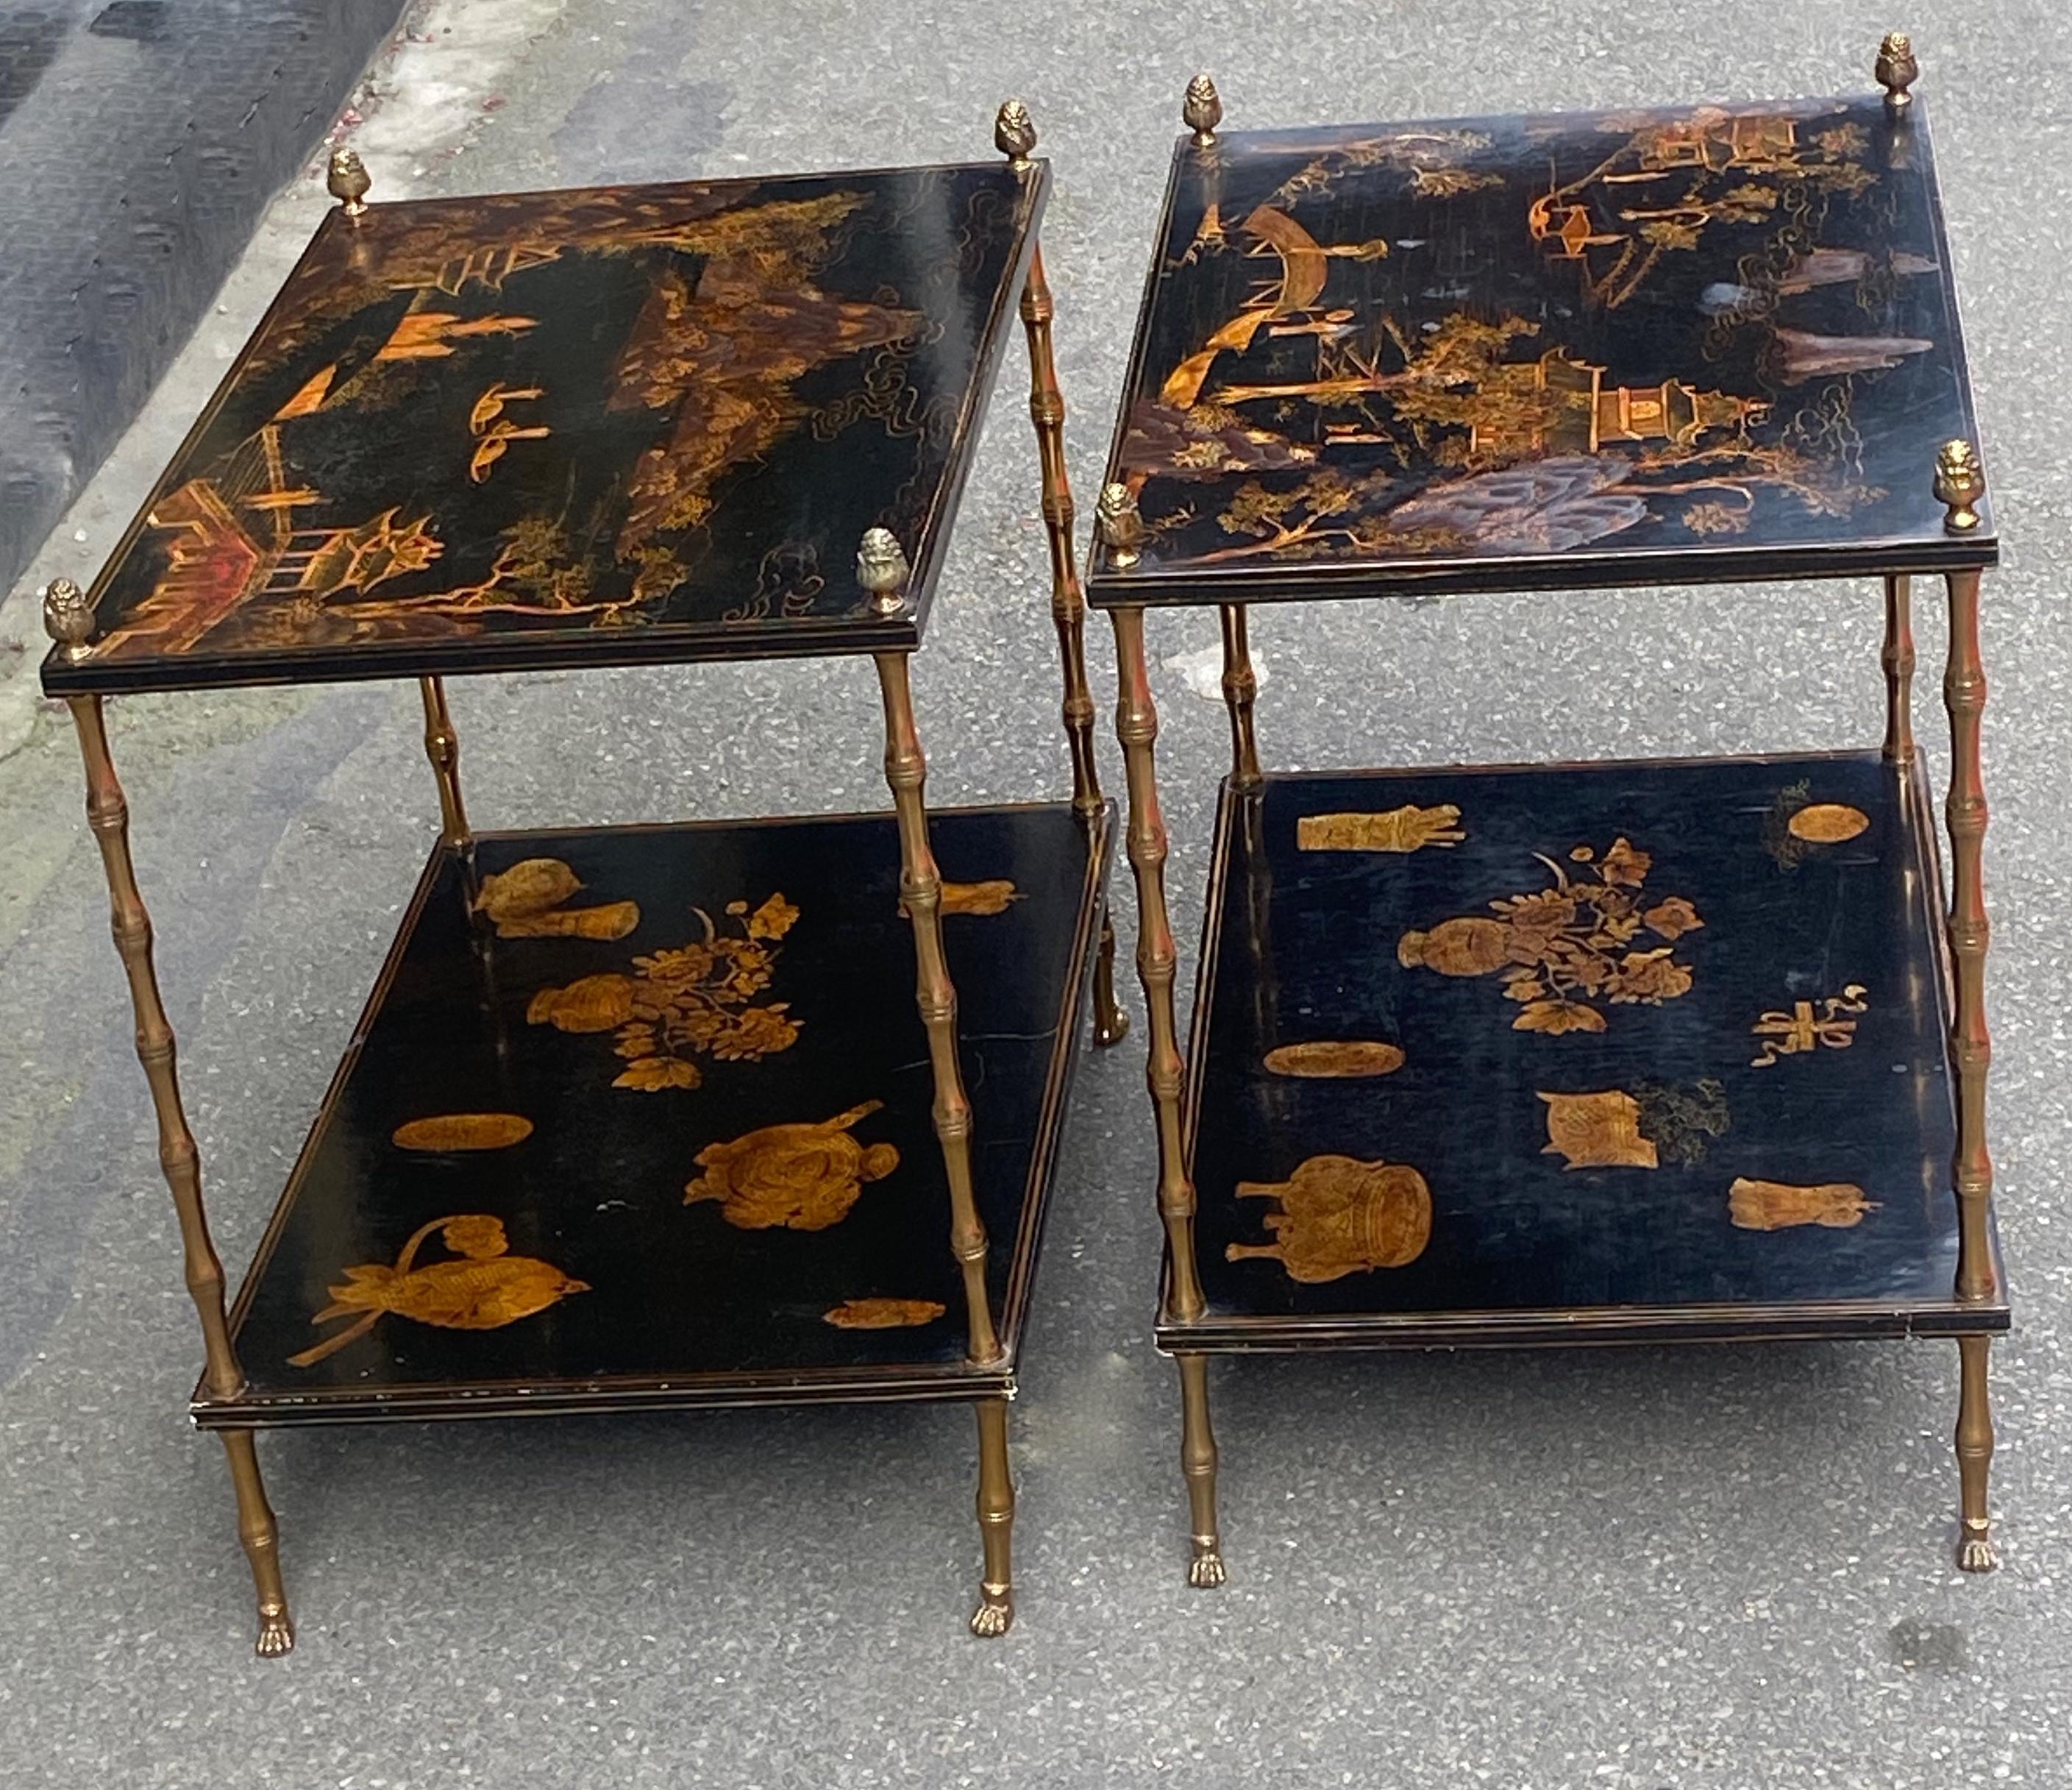 1950 Pair of Maison Baguès Tables Bamboo Decor in Gilt Bronze with Chinese Lacq 4